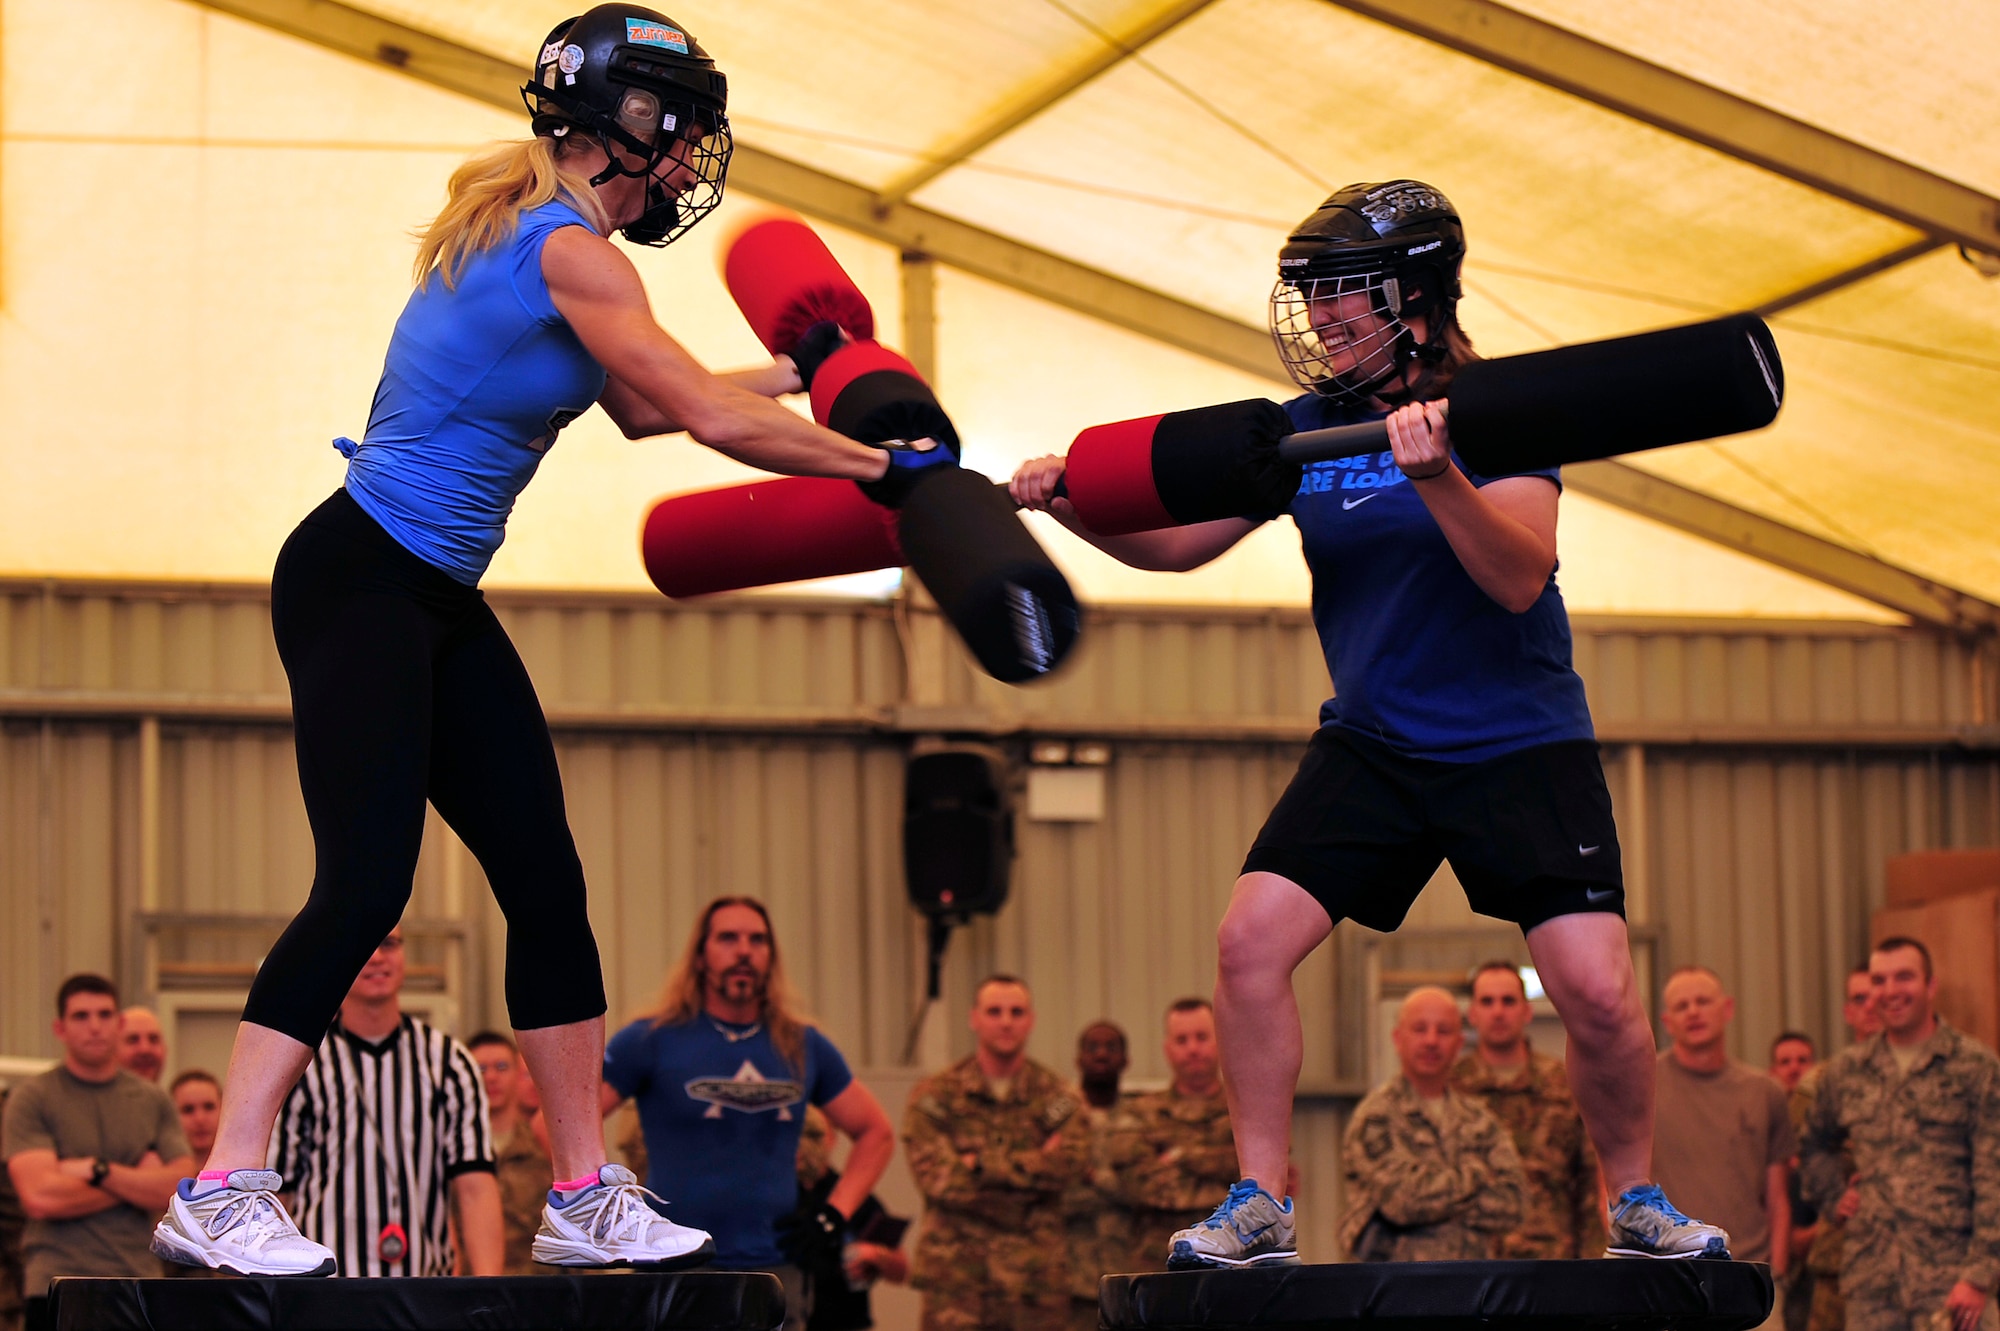 U.S. Air Force Staff Sgt. Tricia Briggs, 380th Expeditionary Operations Support Squadron weather forecaster, deployed from Luke Air Force Base, Ariz., competes against American Gladiator, Beth "Venom" Horn, during the Joust competition at an undisclosed location in Southwest Asia April 6, 2013. The Gladiators and Billy Blanks visited several bases in Southwest Asia during an Armed Forces Entertainment Fitness Tour. (U.S. Air Force photo by Tech. Sgt. Christina M. Styer/Released) 